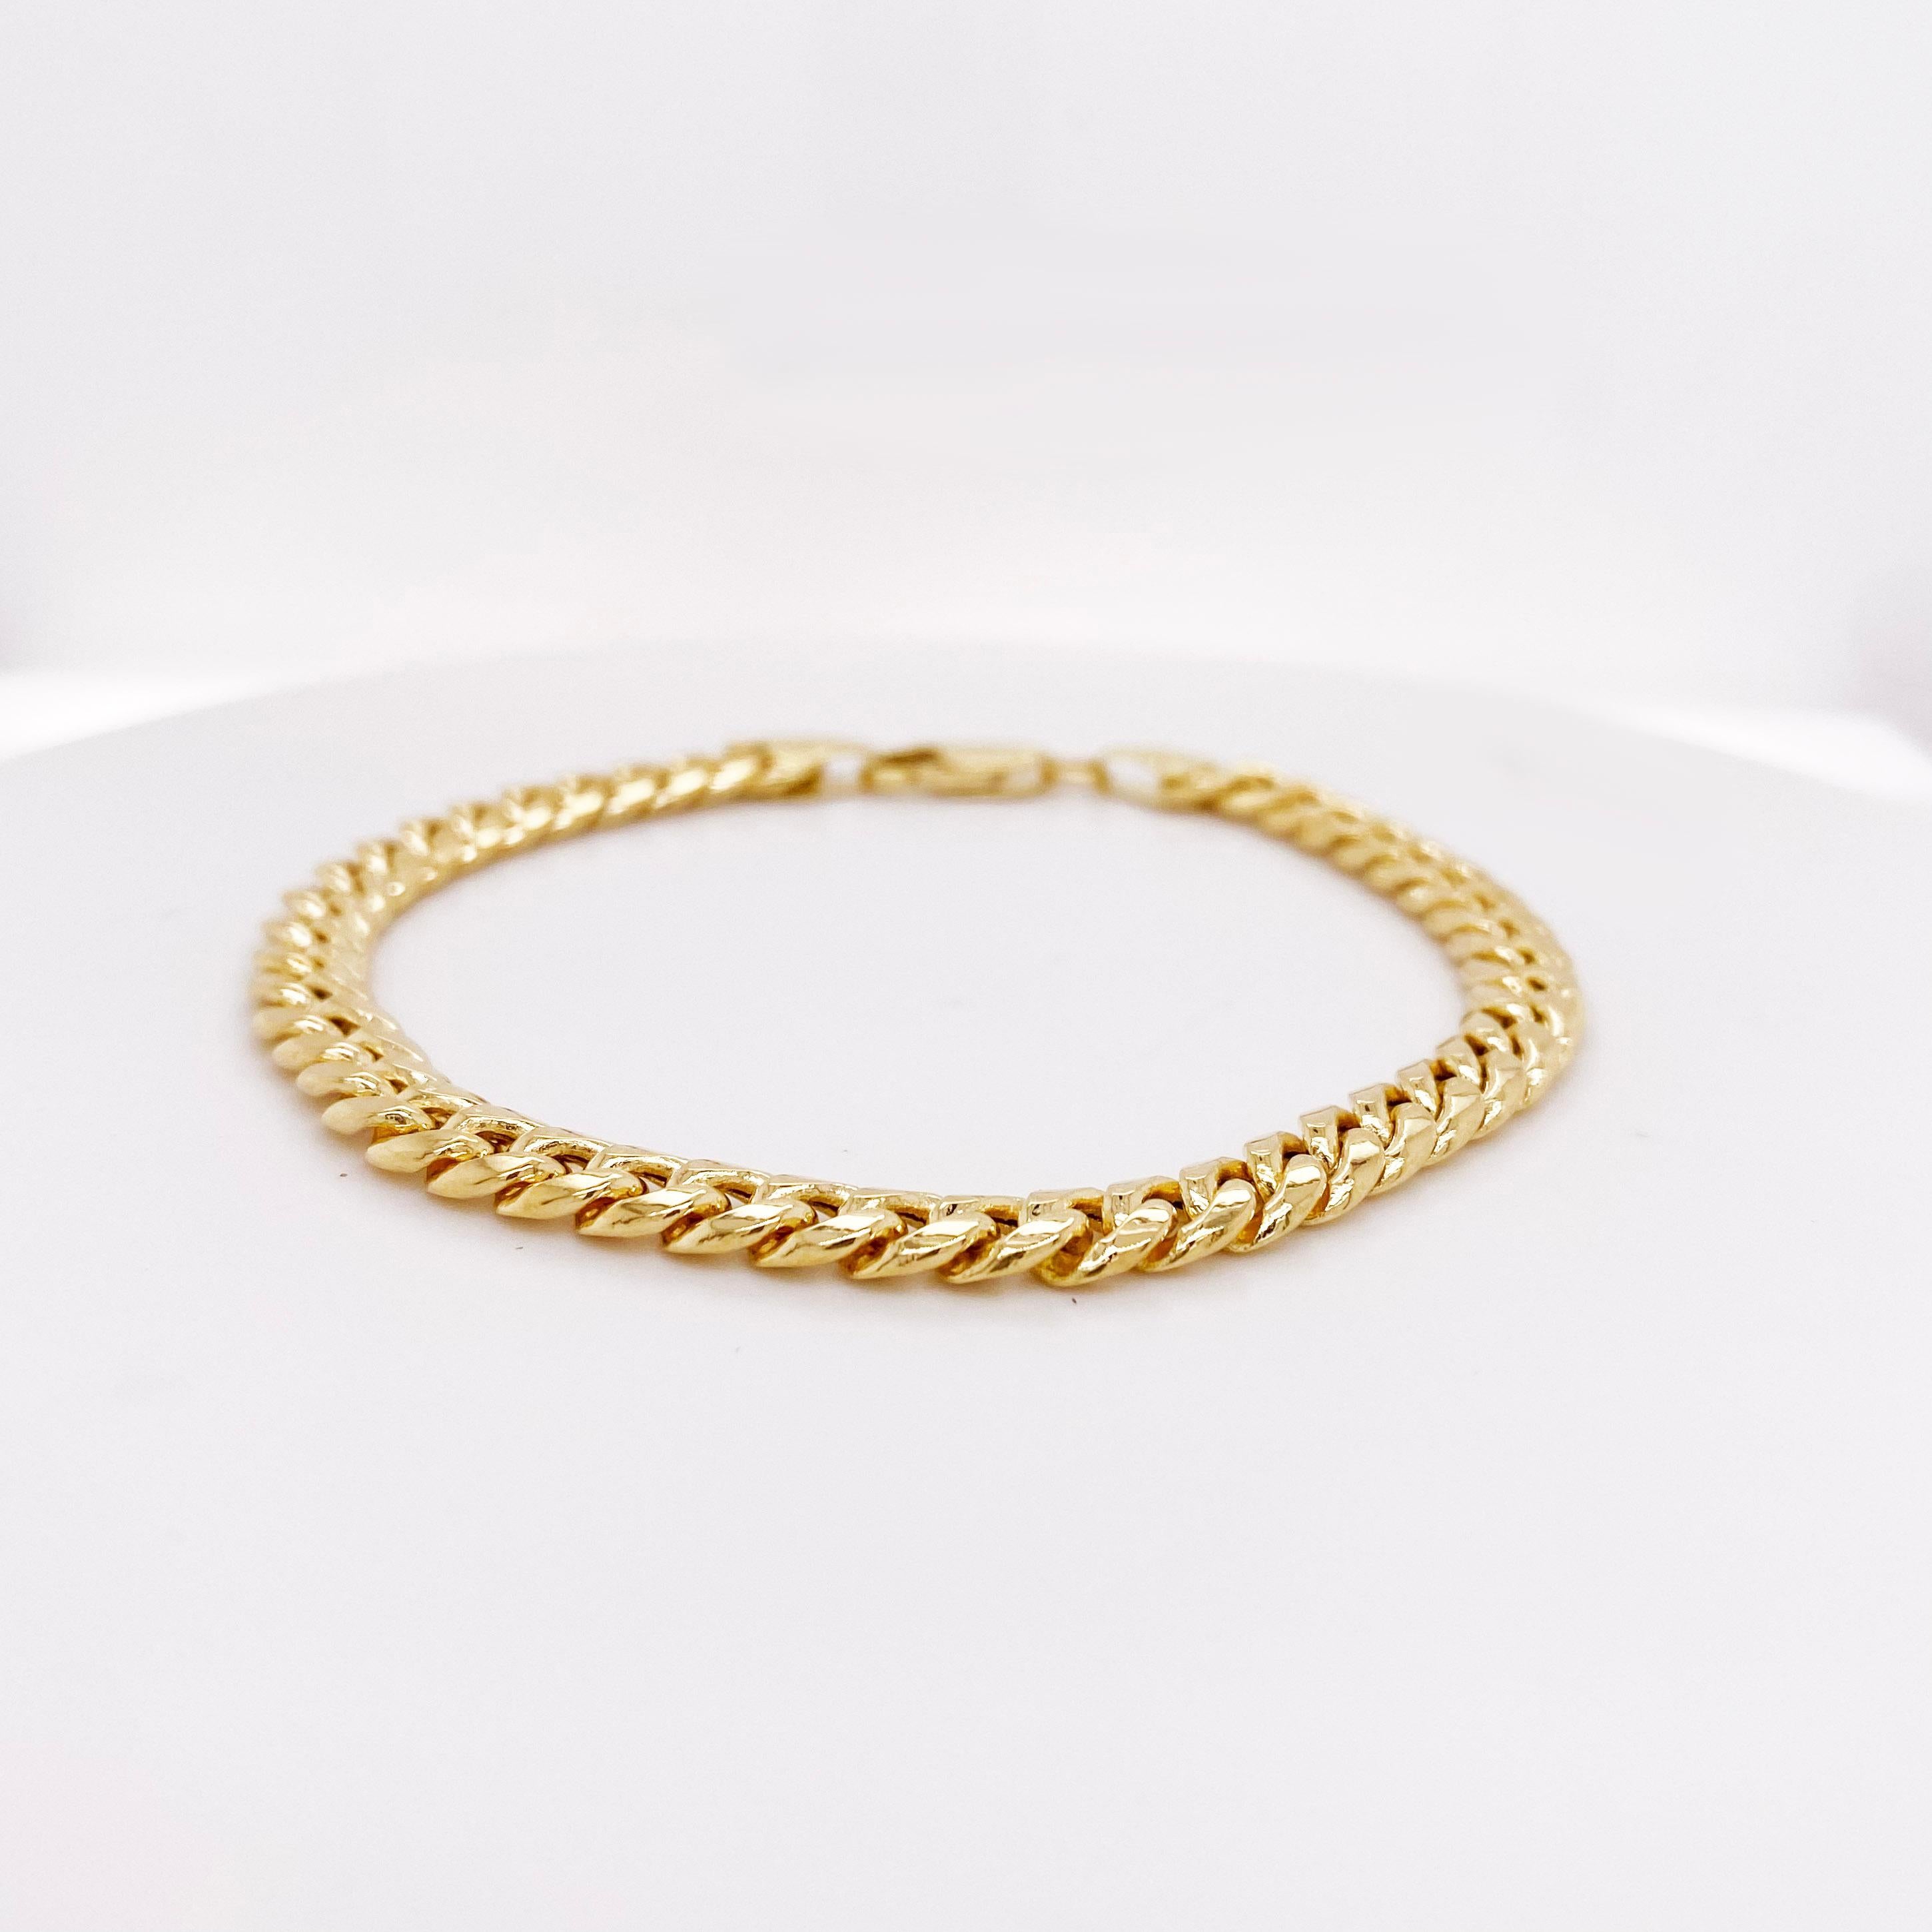 Miami Cuban chain bracelet made in 14k yellow gold. This bracelet is the hottest chain bracelet in today's fashion! Big, gold jewelry is back and better than ever! Add this chain to your fine jewelry collection as your signature piece and wear it